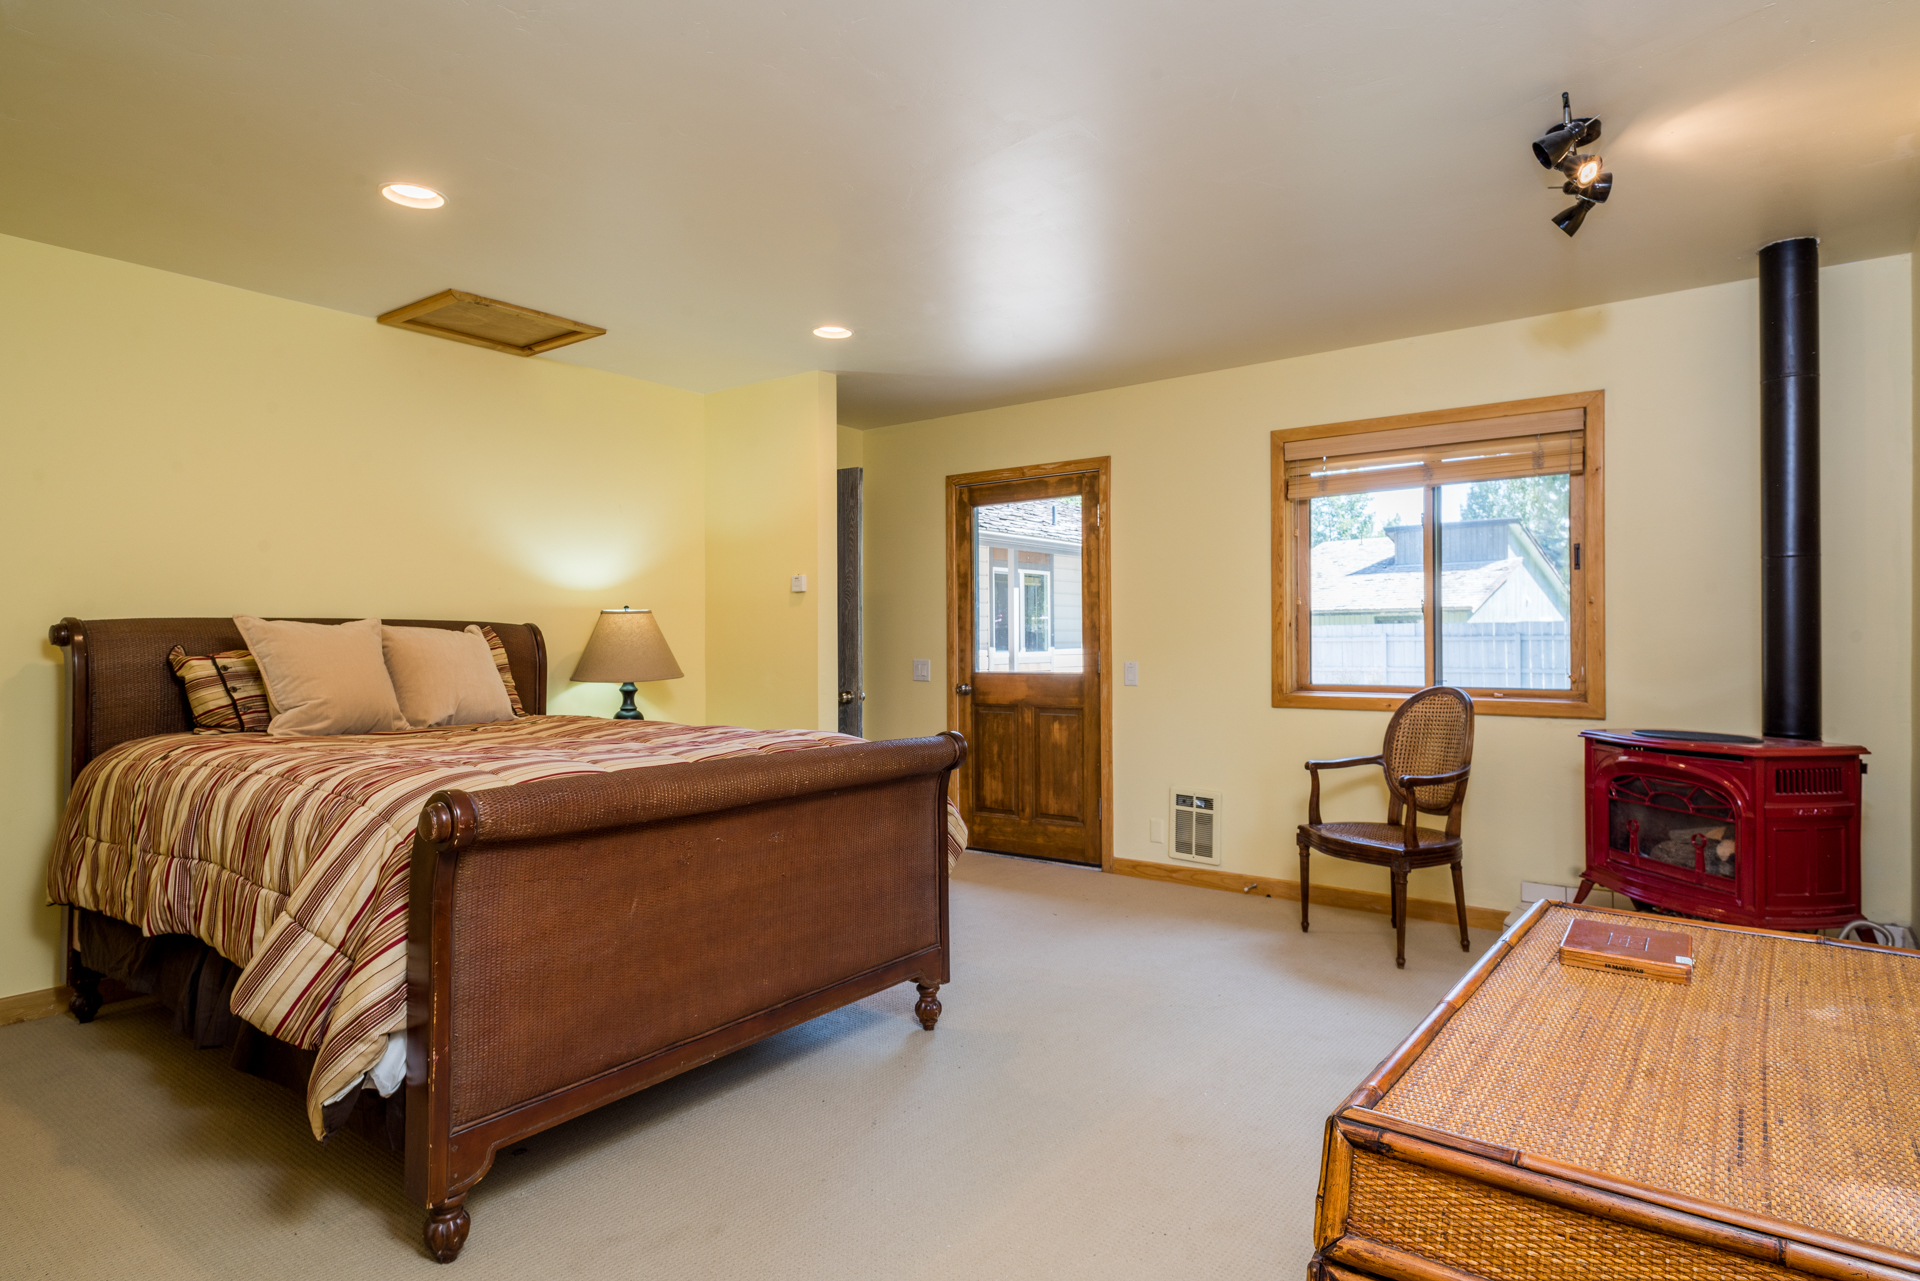 Featured Home at 122 Meadows Loop in Ketchum, Idaho 